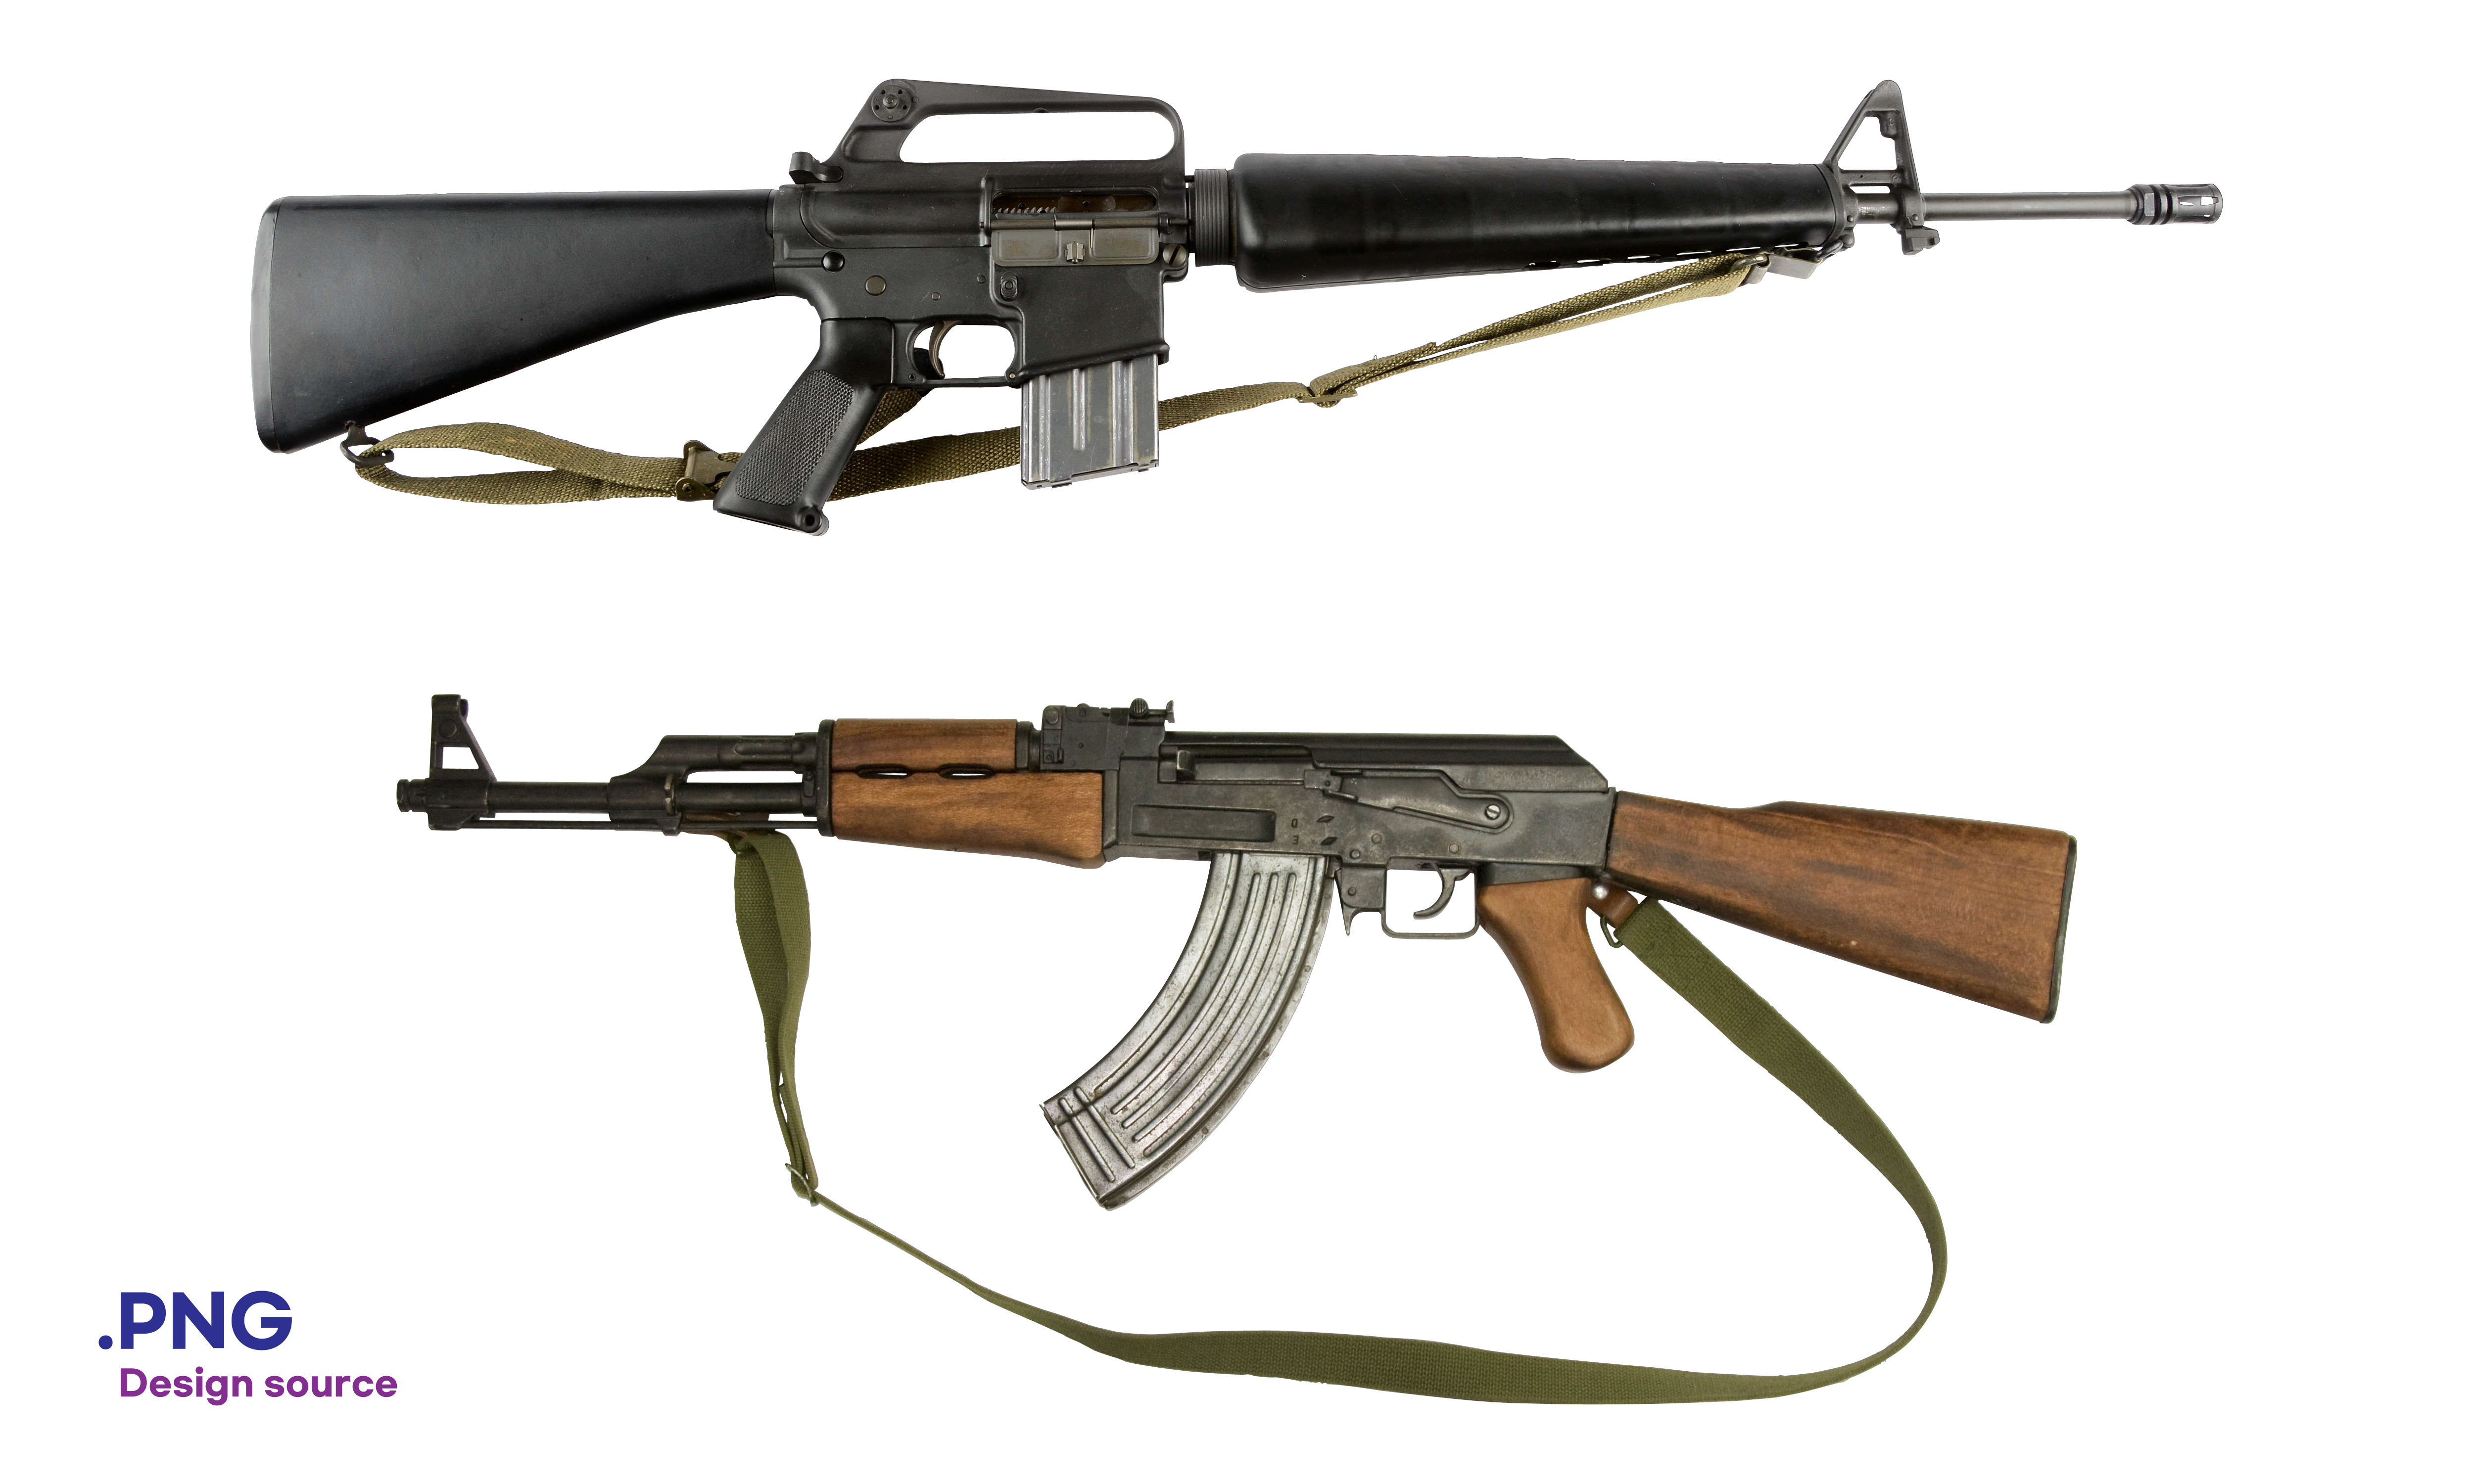 Rifles Weapon M16 AK 47 Simple Background Digital Art Military Watermarked Russian Soviet Firearms A 5000x3000